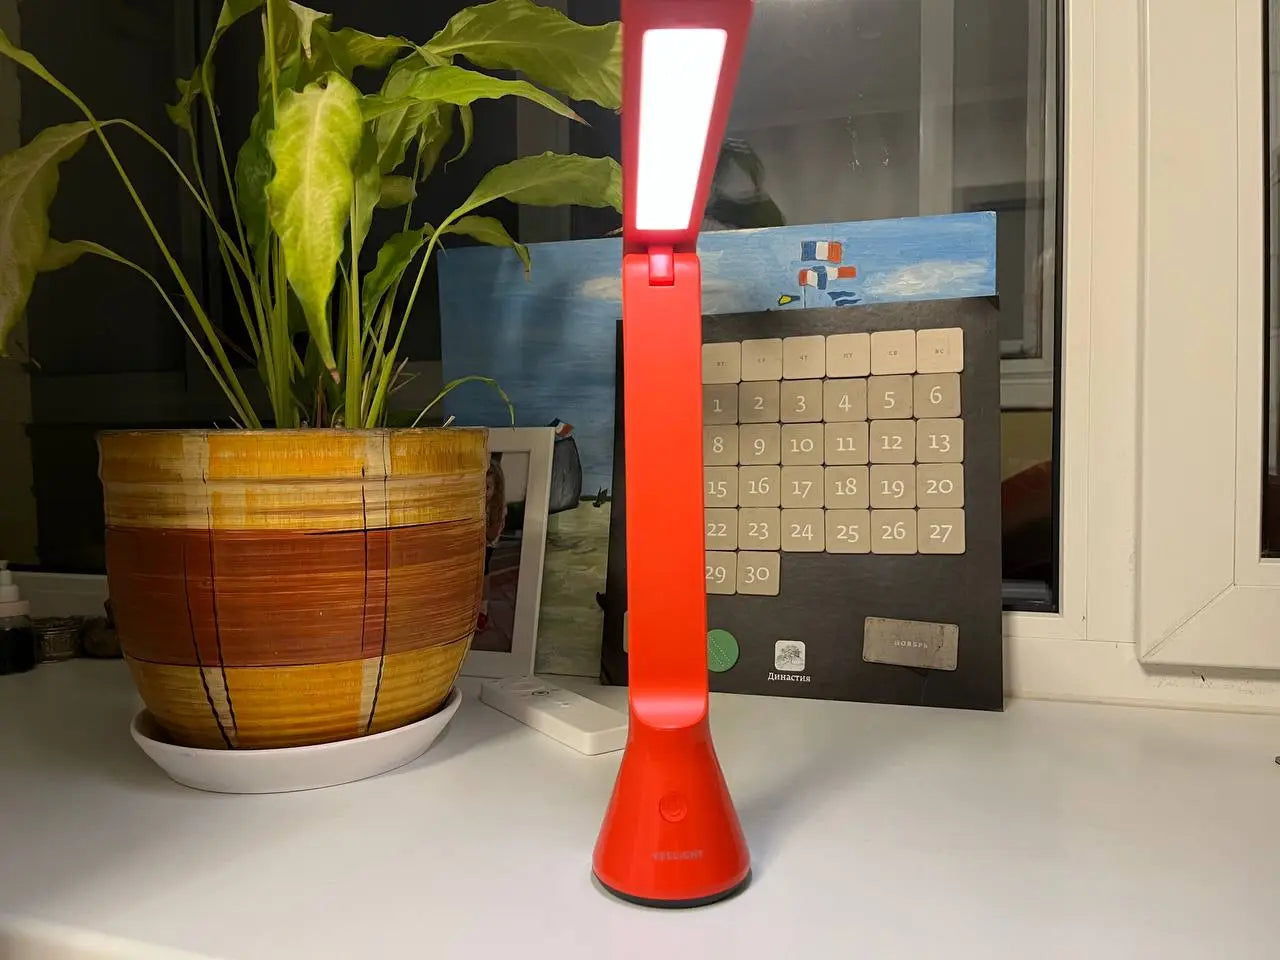 Yeelight Folding Table Lamp (Rechargeable) J1 Pro-Red